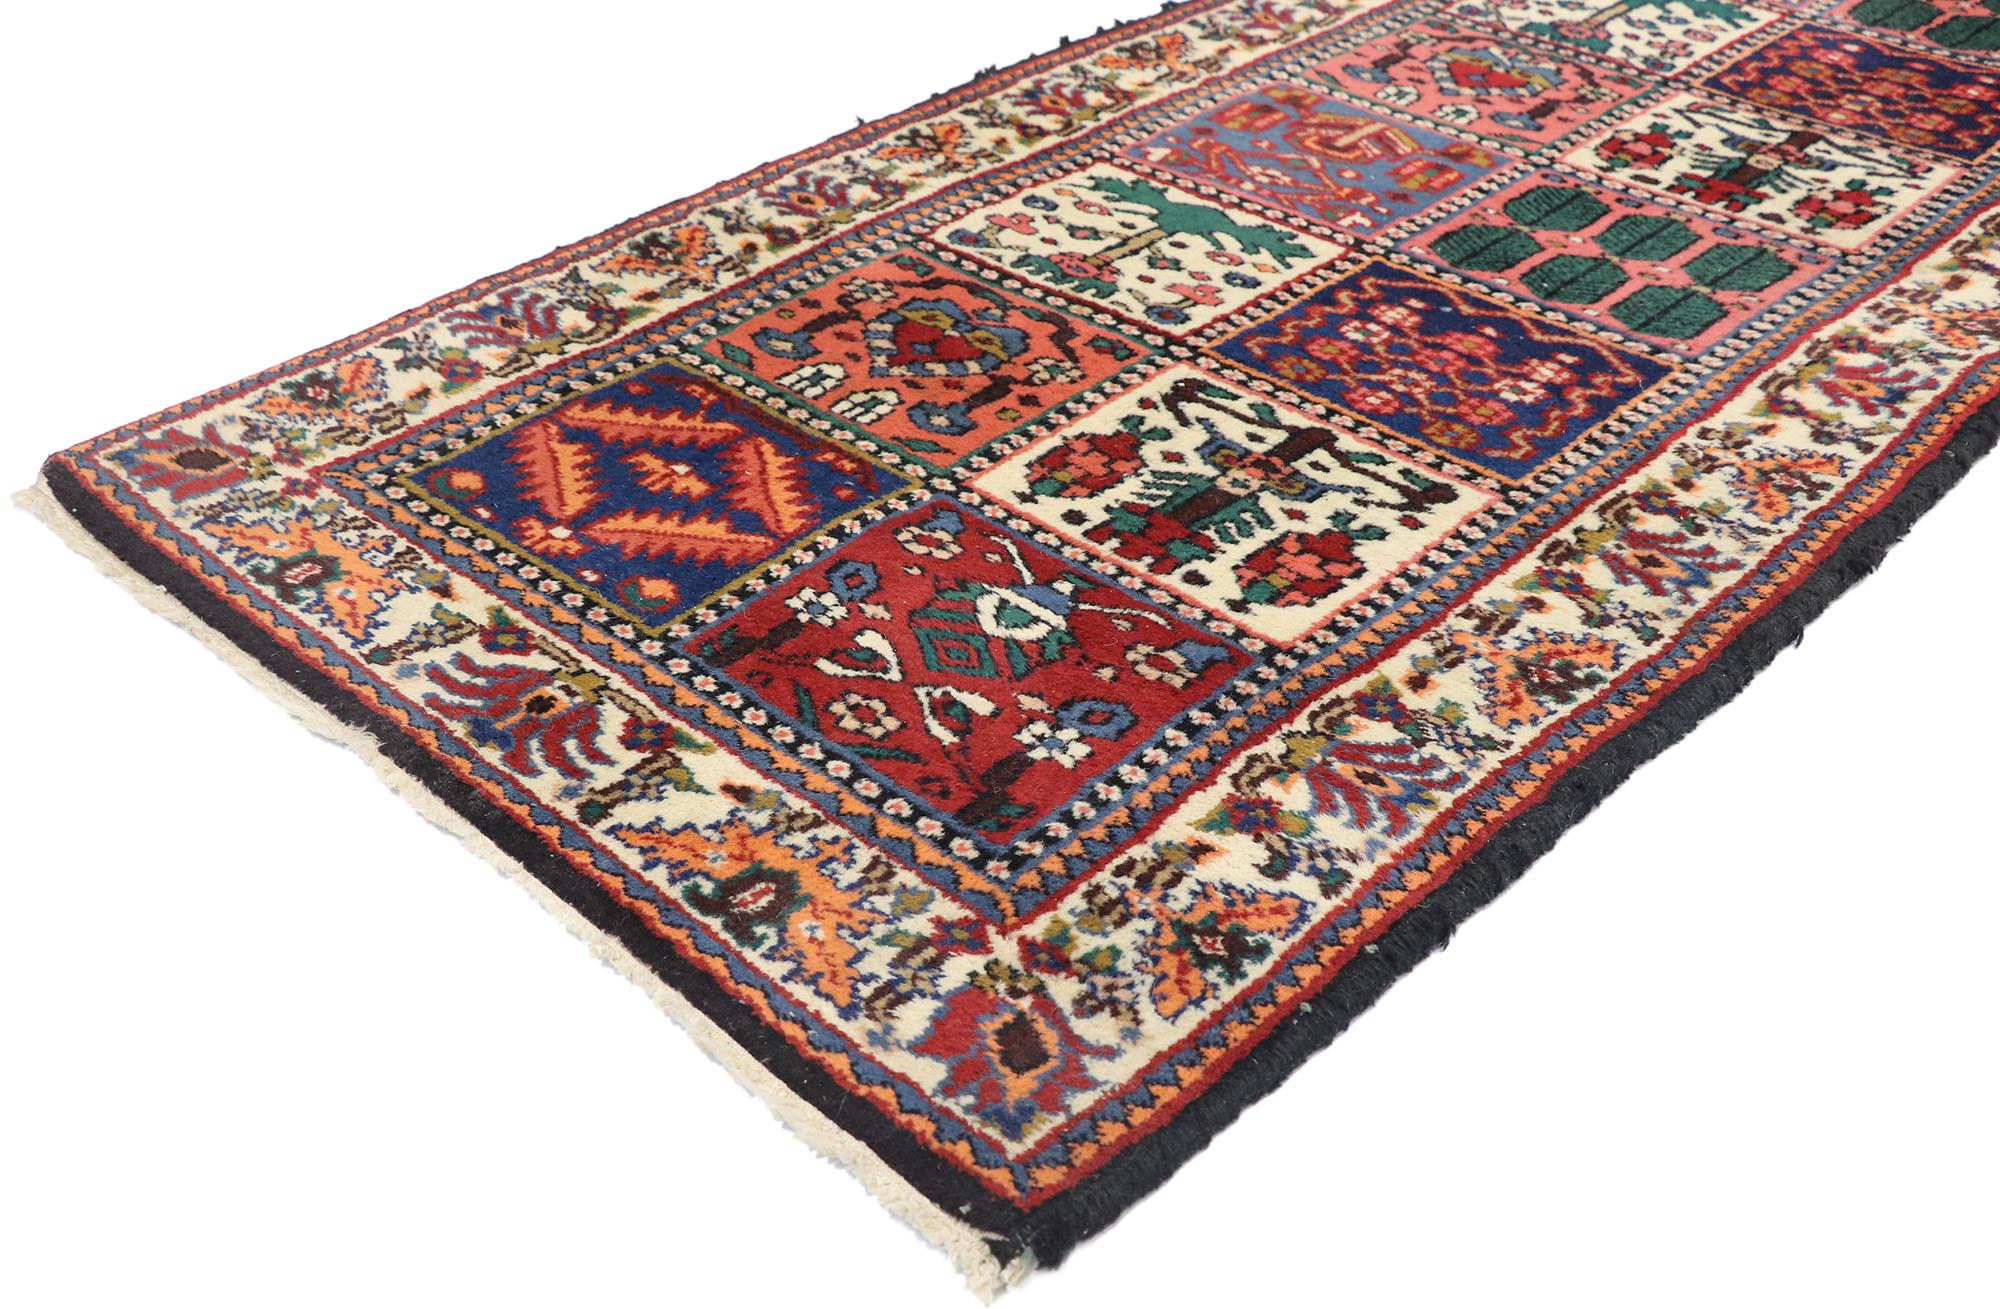 77595 vintage Persian Bakhtiari runner with Four Seasons Design and Traditional style. Cleverly composed with traditional style, this hand-knotted wool vintage Persian Bakhtiari runner takes on a curated lived-in look that feels timeless while